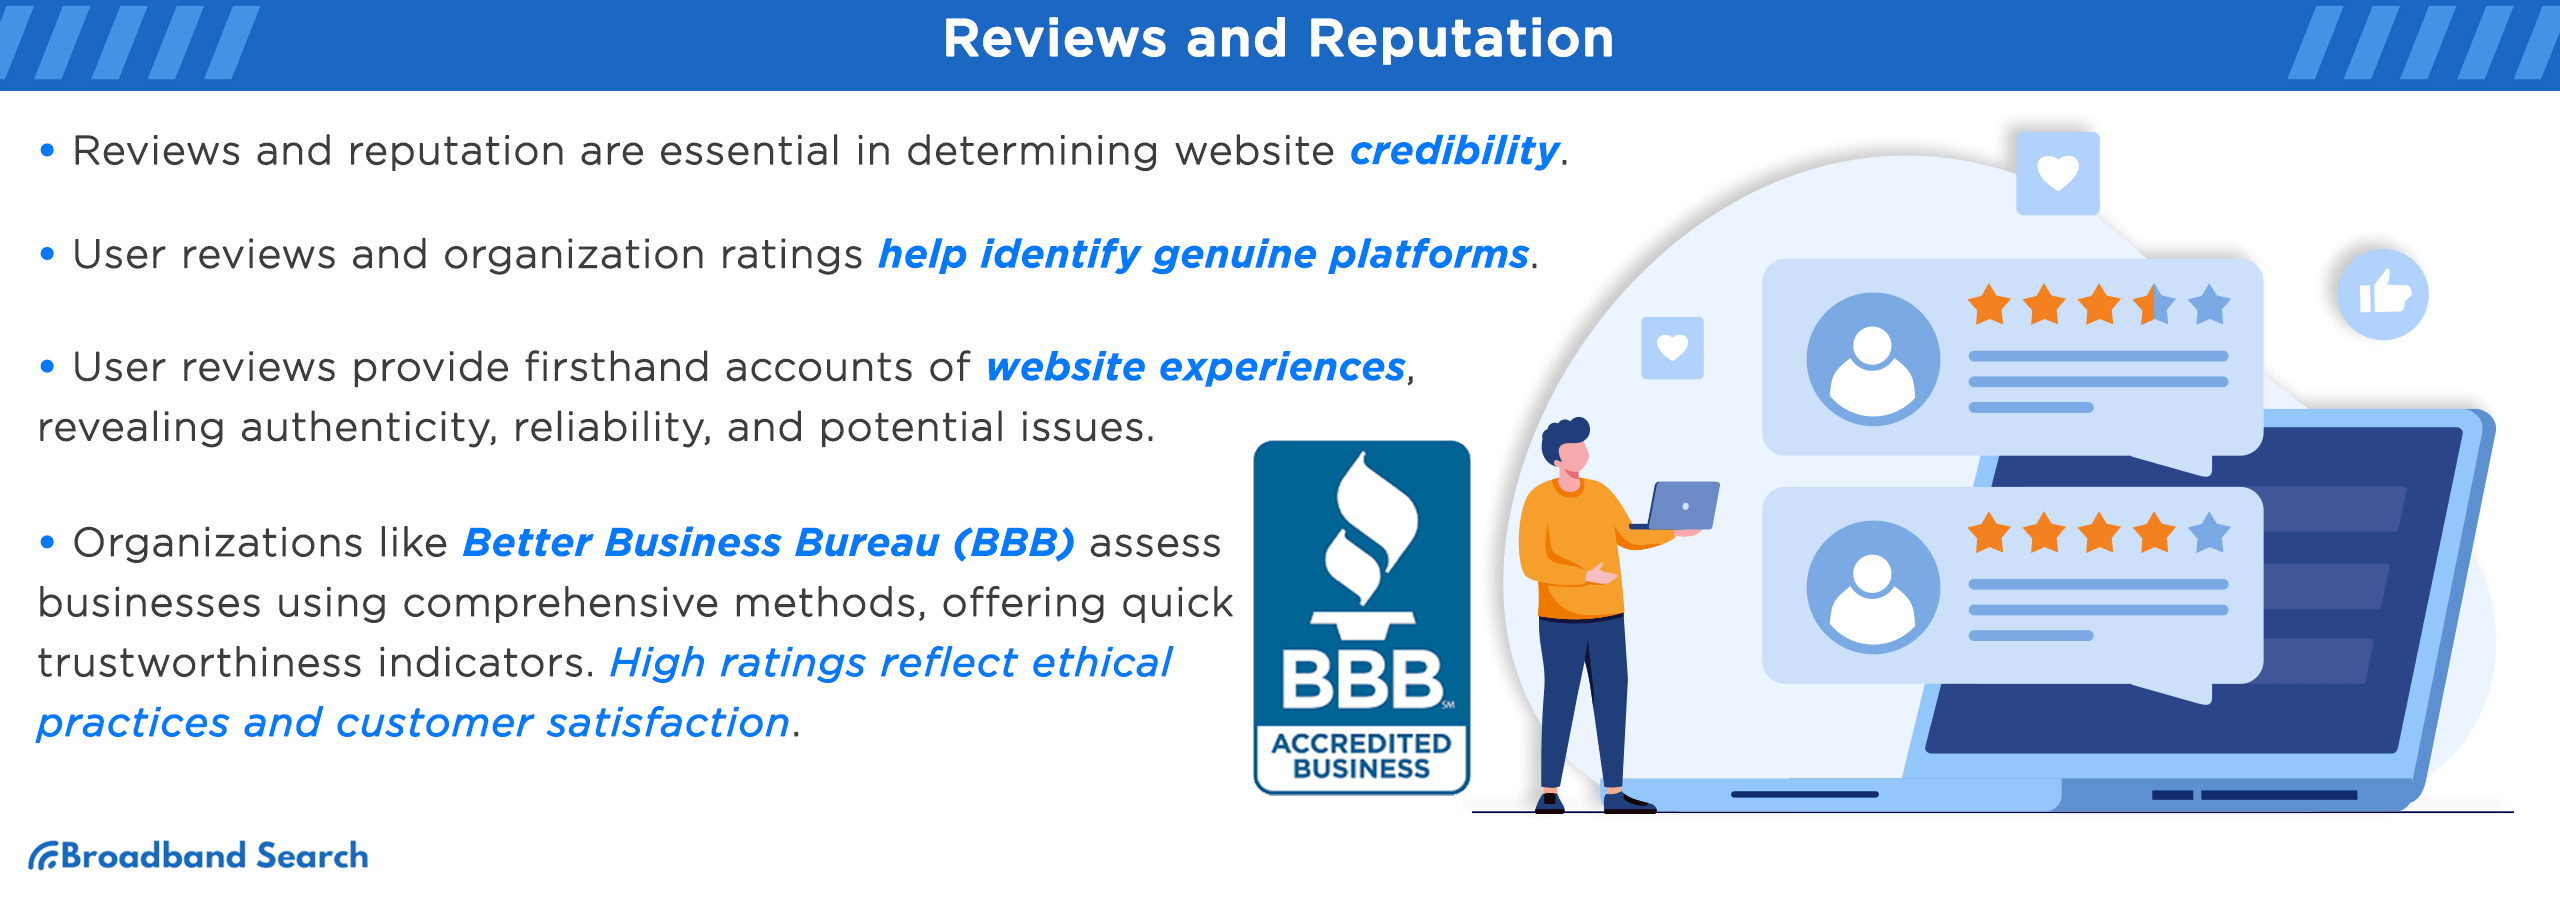 Importance of reviews and reputation of websites